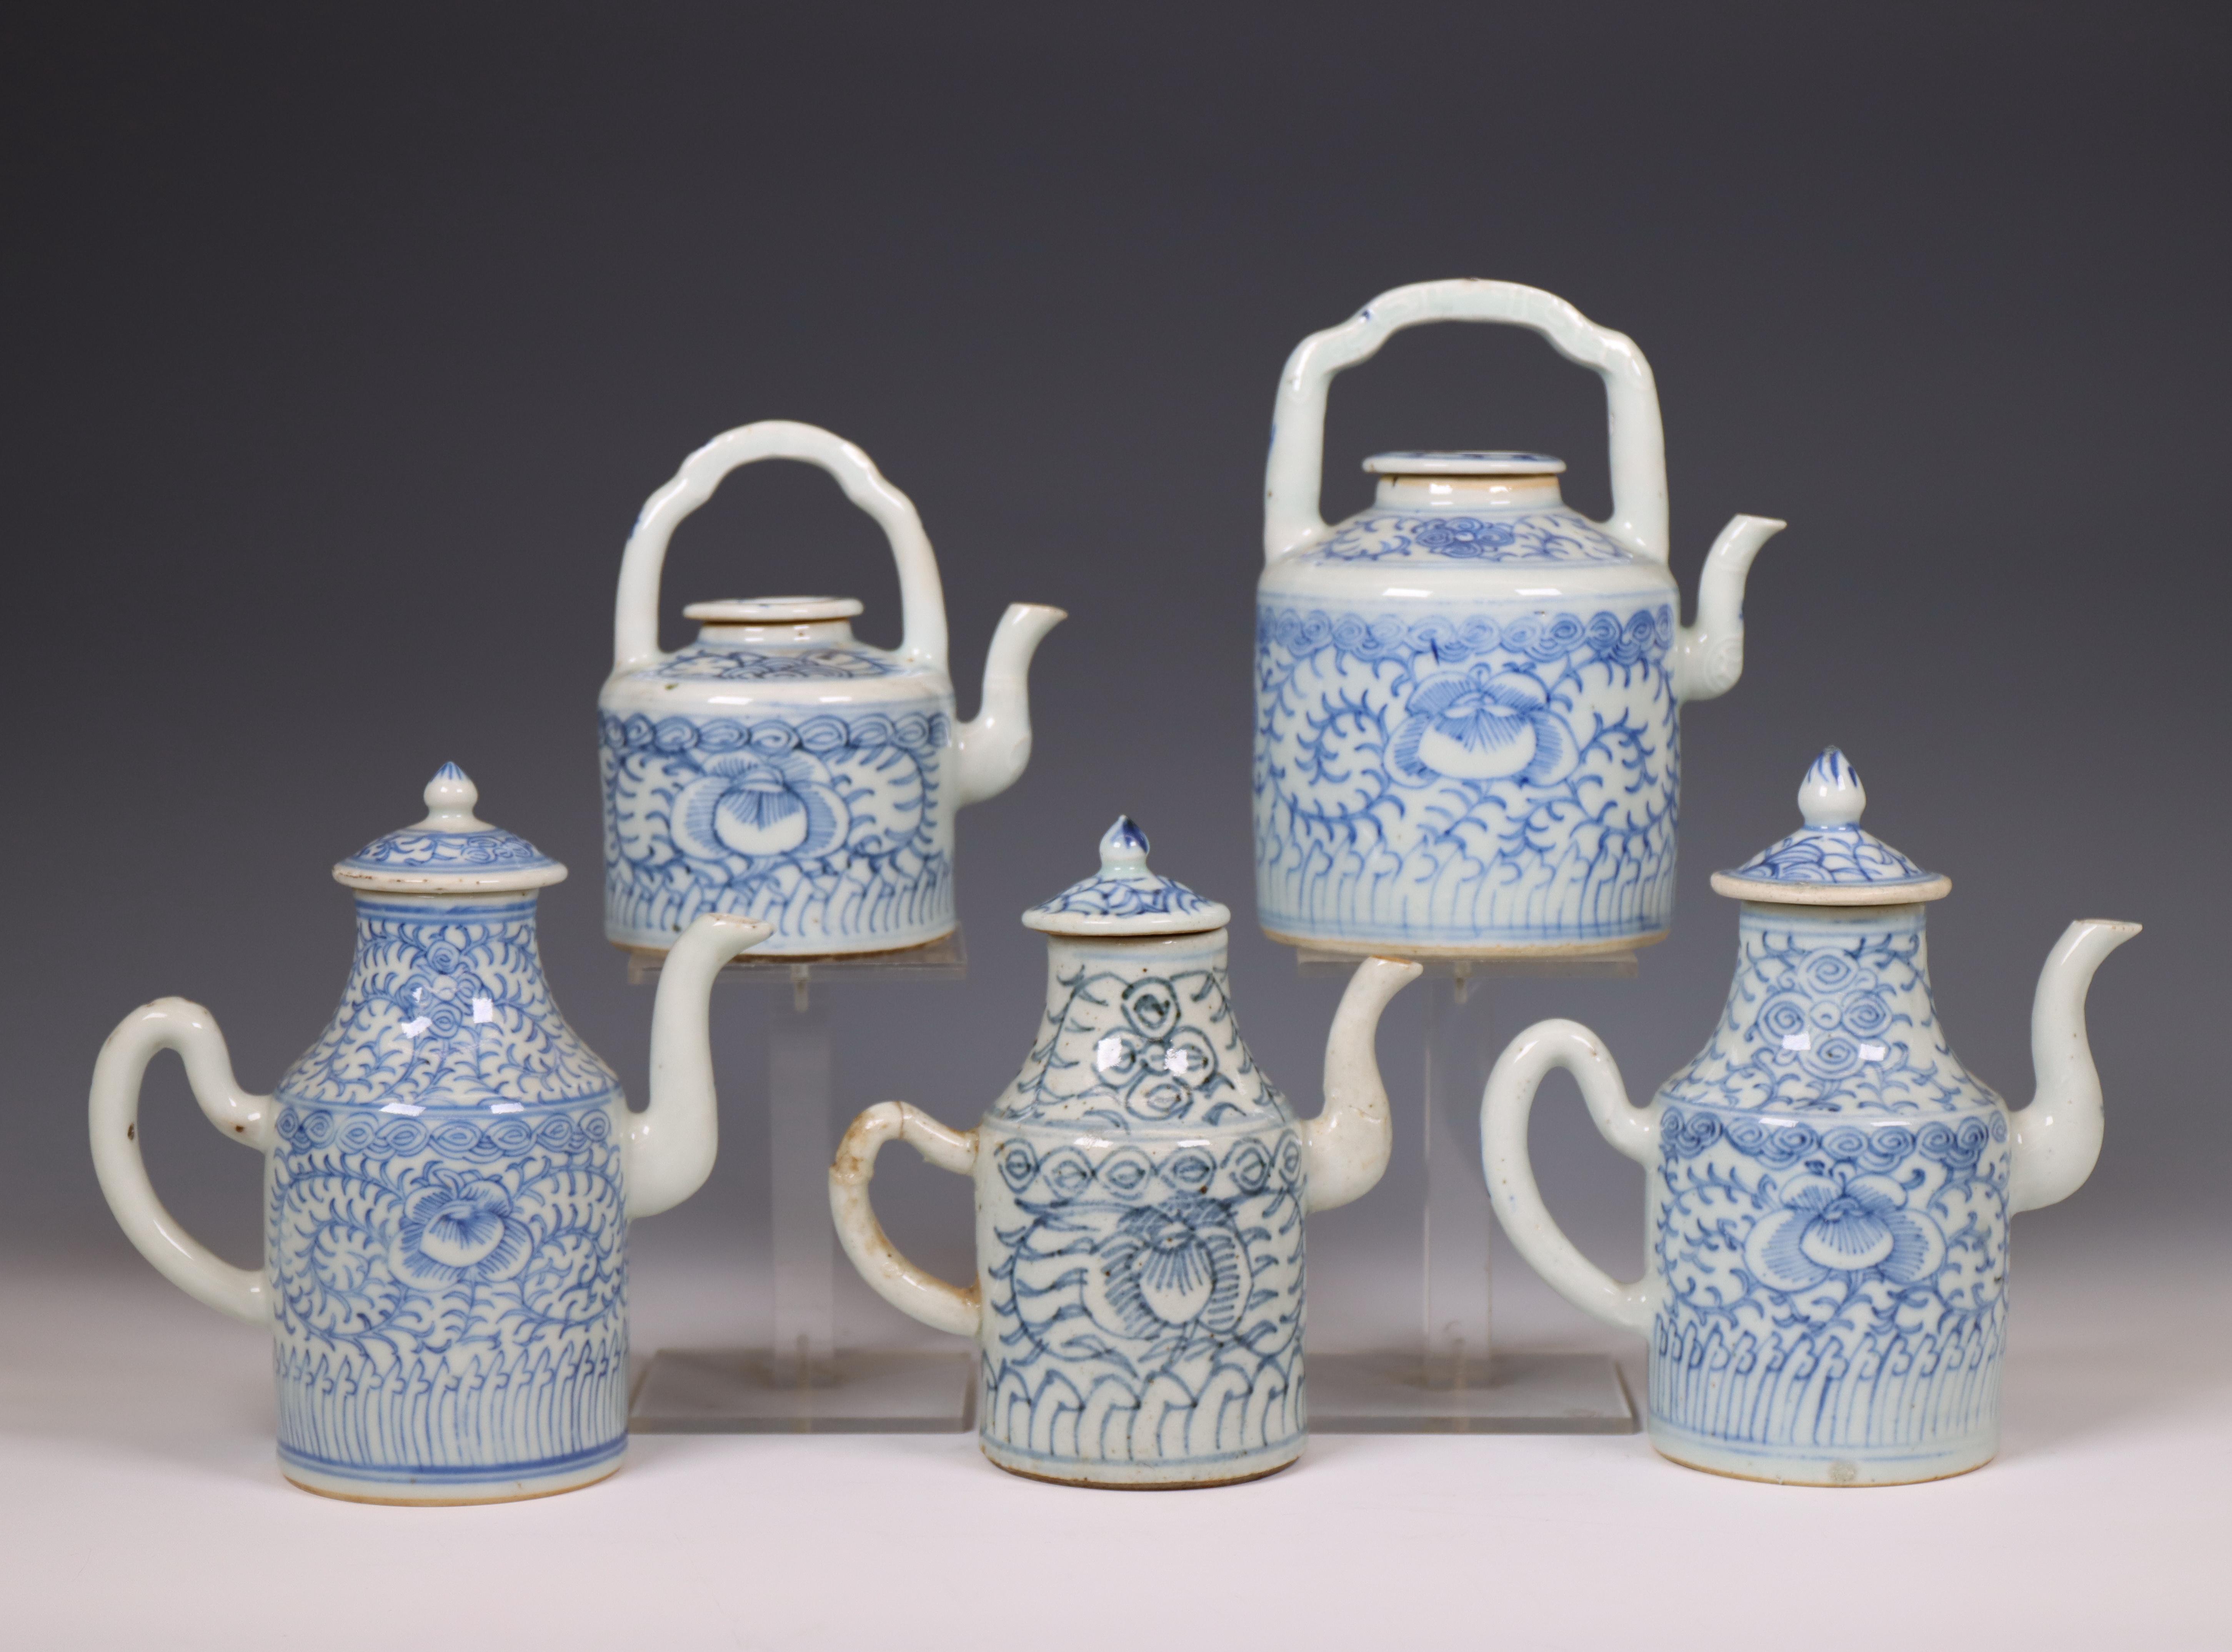 China, a collection of five blue and white porcelain teapots and milk-jugs and covers, 20th century, - Image 2 of 4